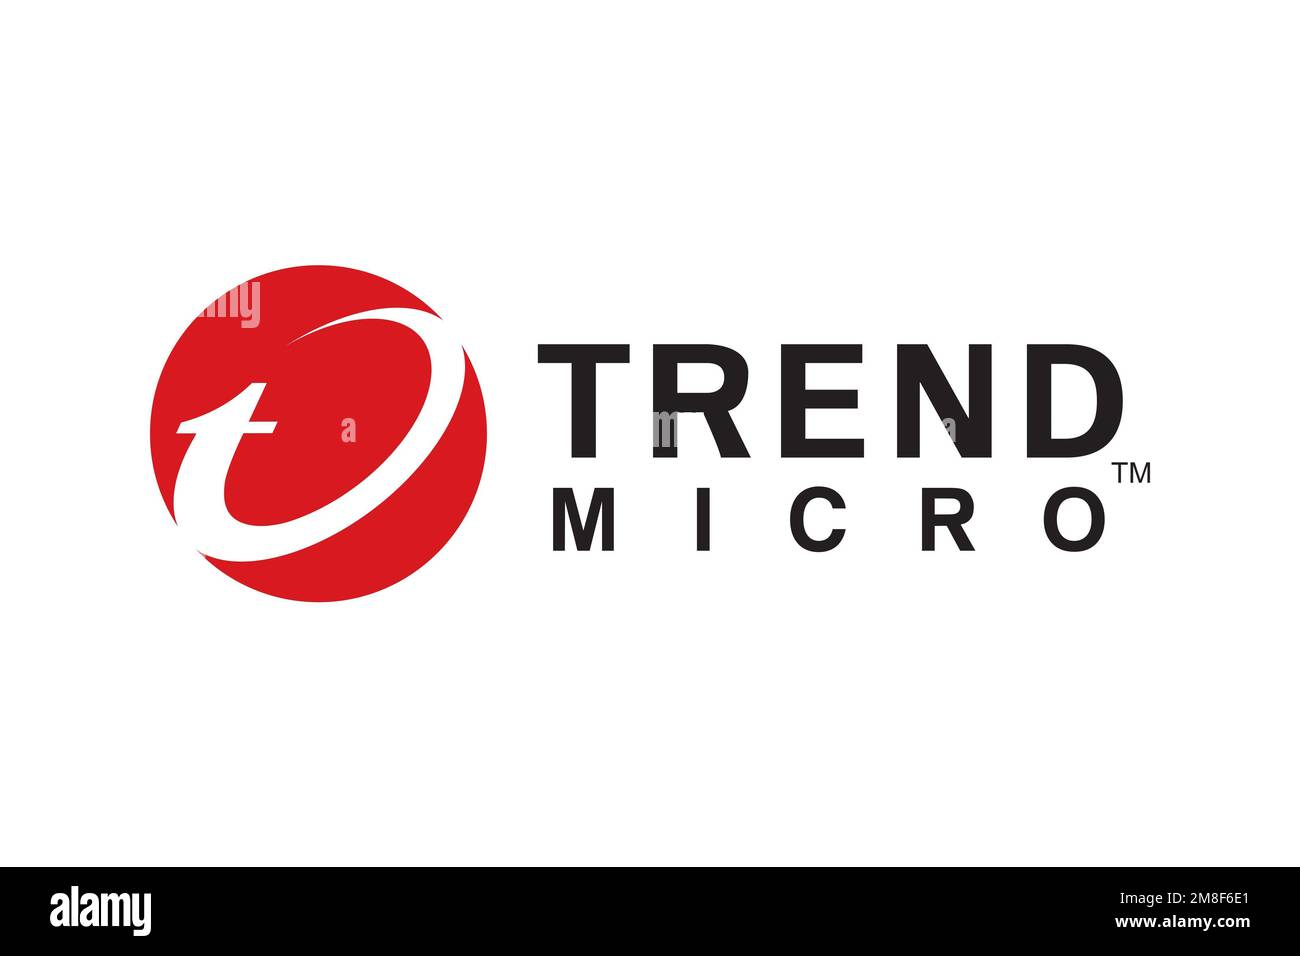 Trend micro, logo, fond blanc Banque D'Images